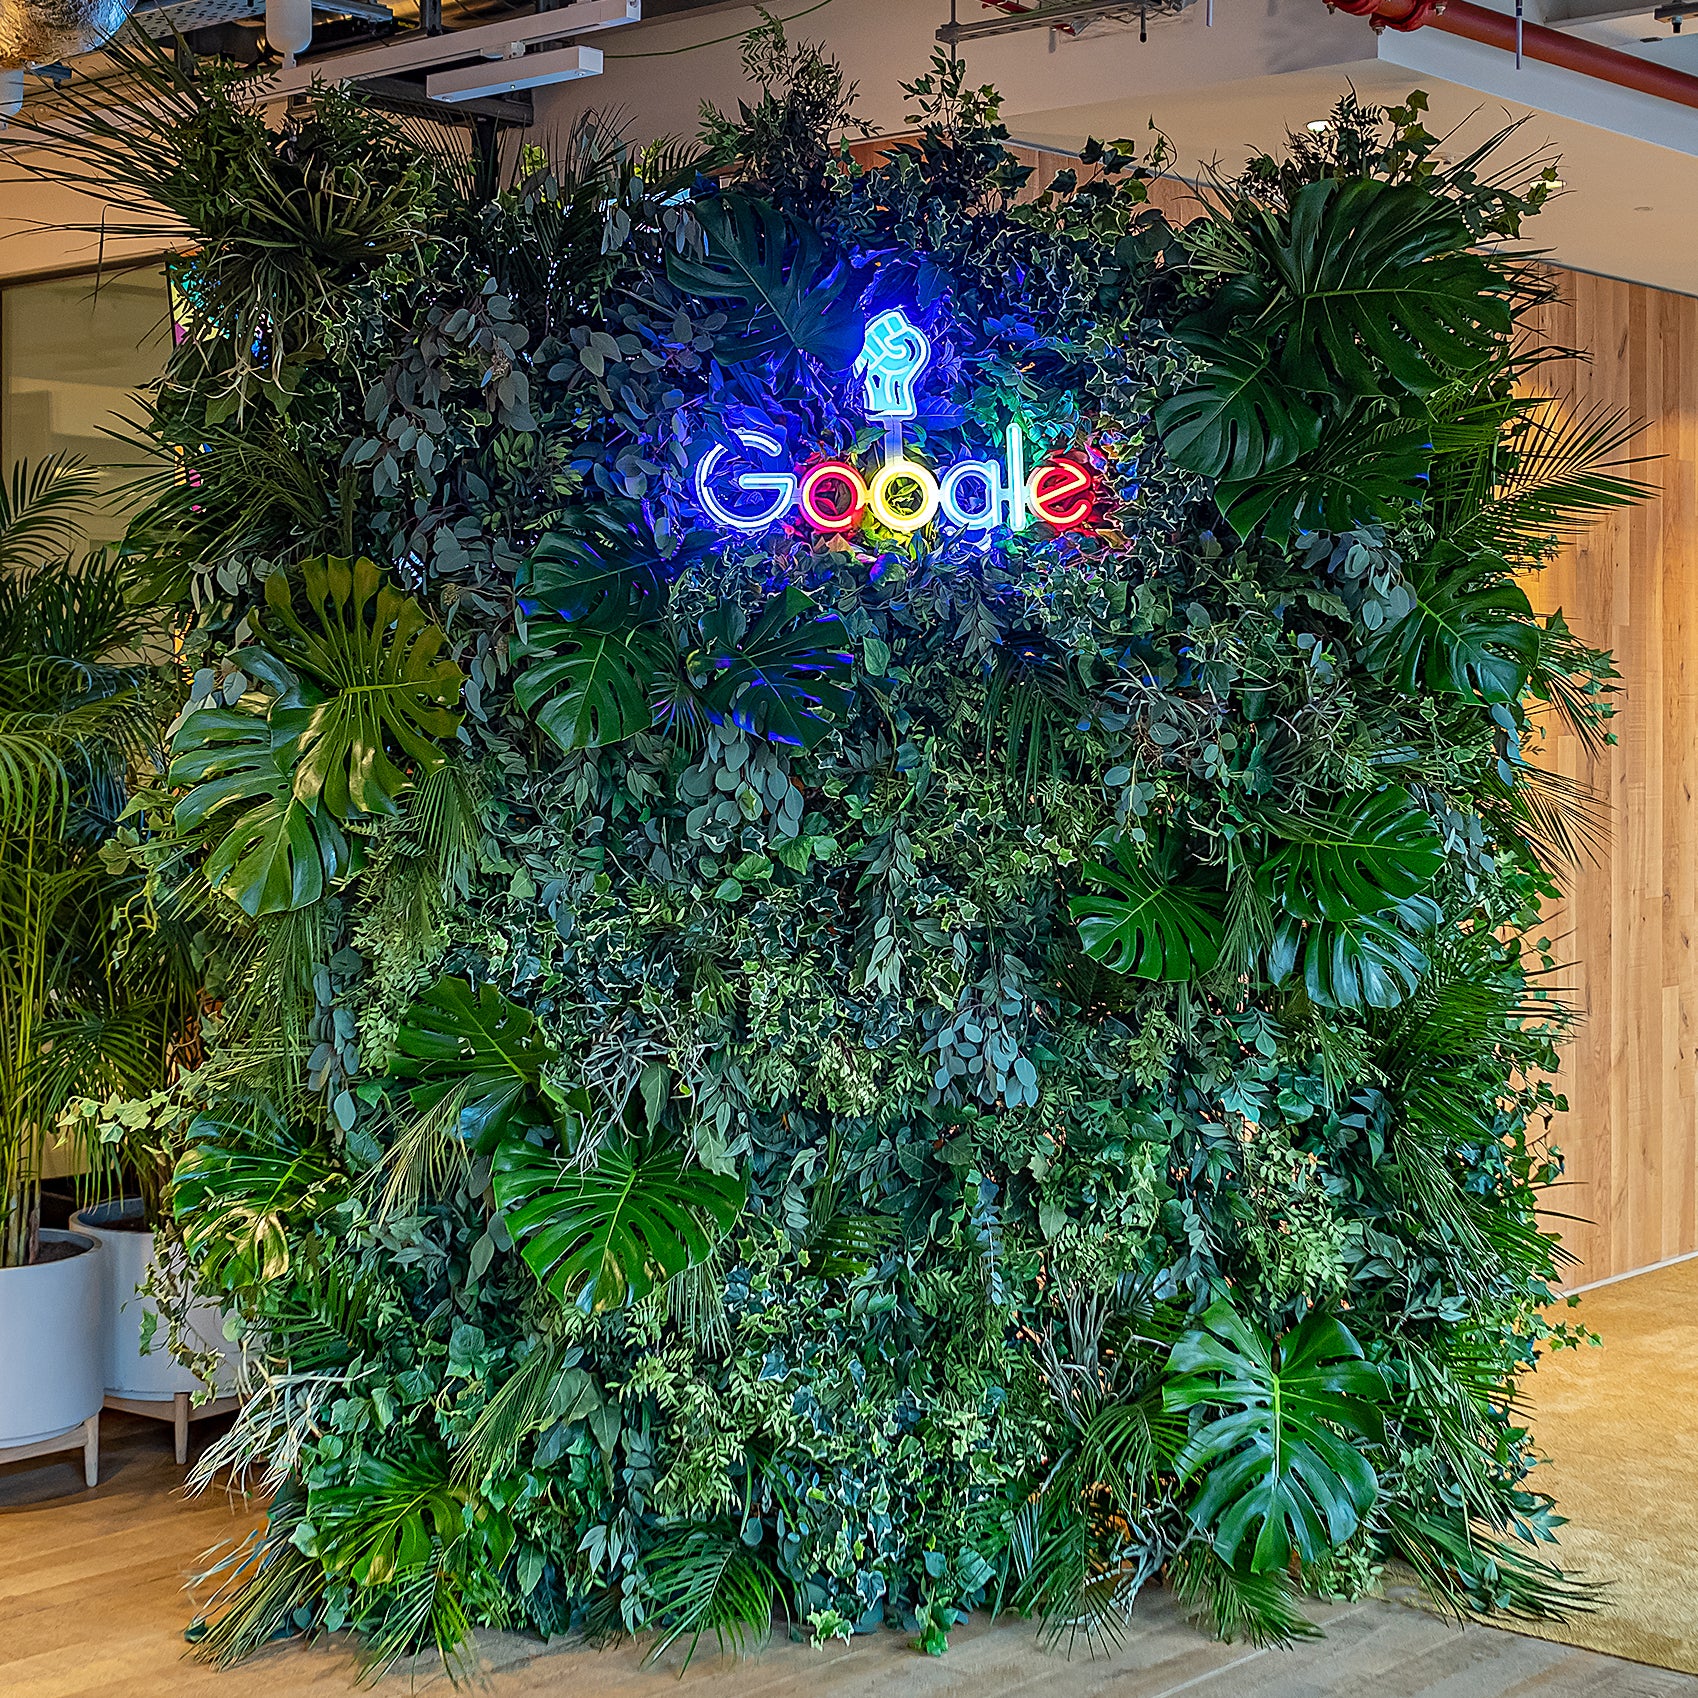 With a prominent interest in natural green stems, event florist Amaranté London partnered with Google to create a bespoke flower wall for their London office.